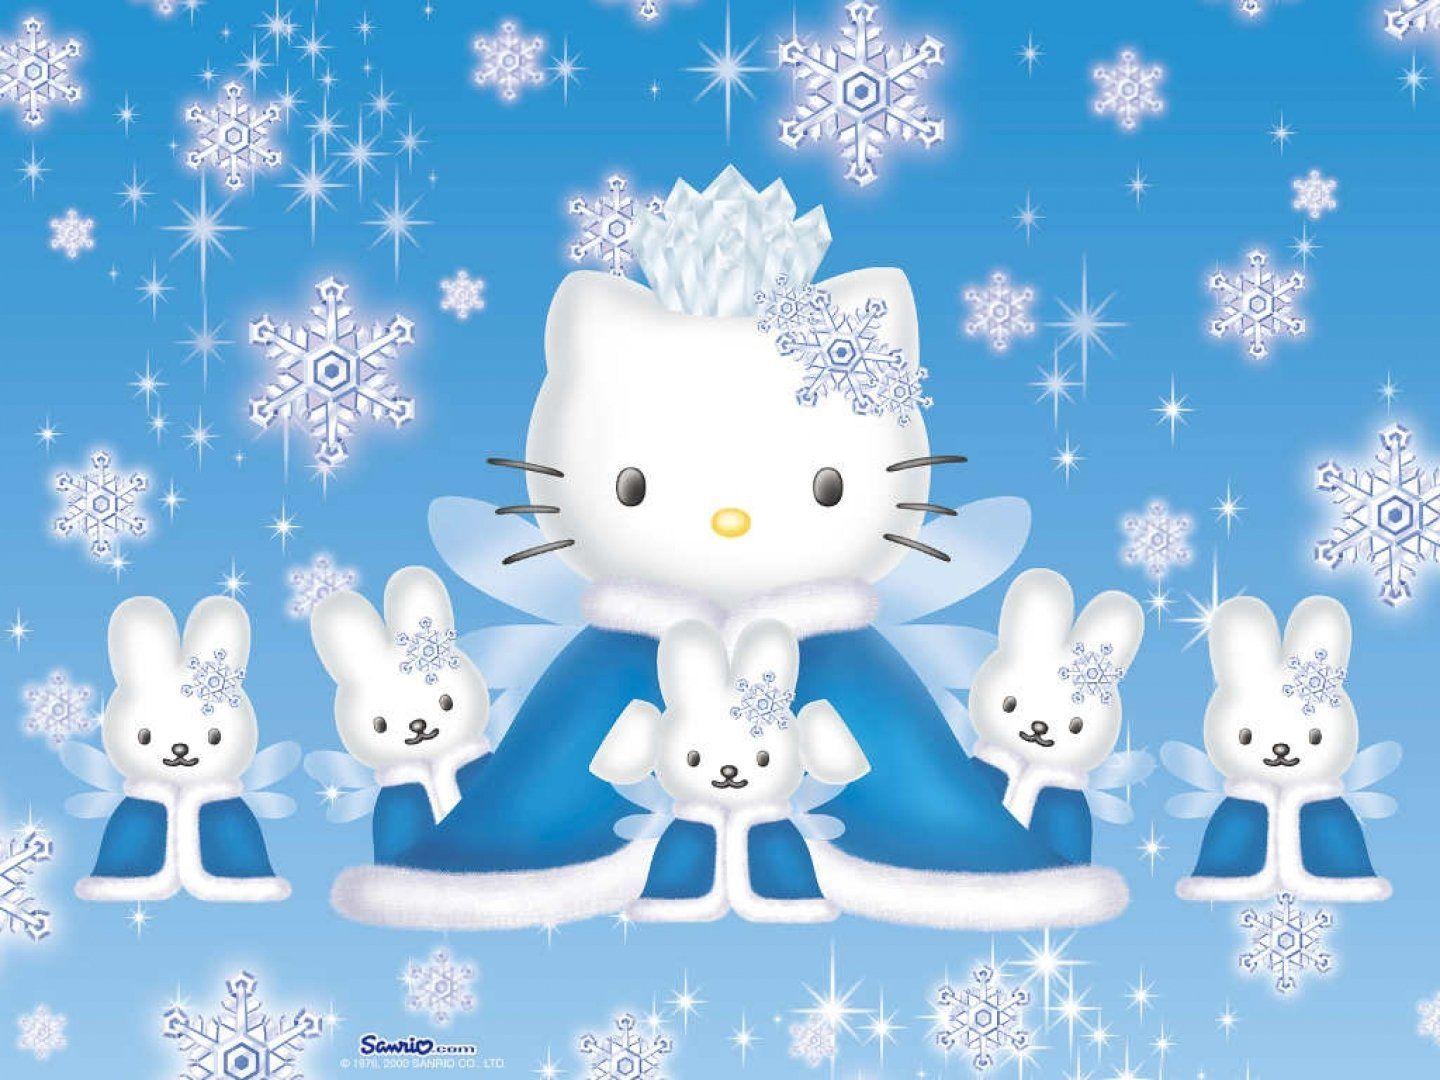 Blue Hello Kitty Wallpapers Top Free Blue Hello Kitty Backgrounds Wallpaperaccess Ballet bow hello kitty anime hello kitty hd art, cute, flowers. blue hello kitty wallpapers top free